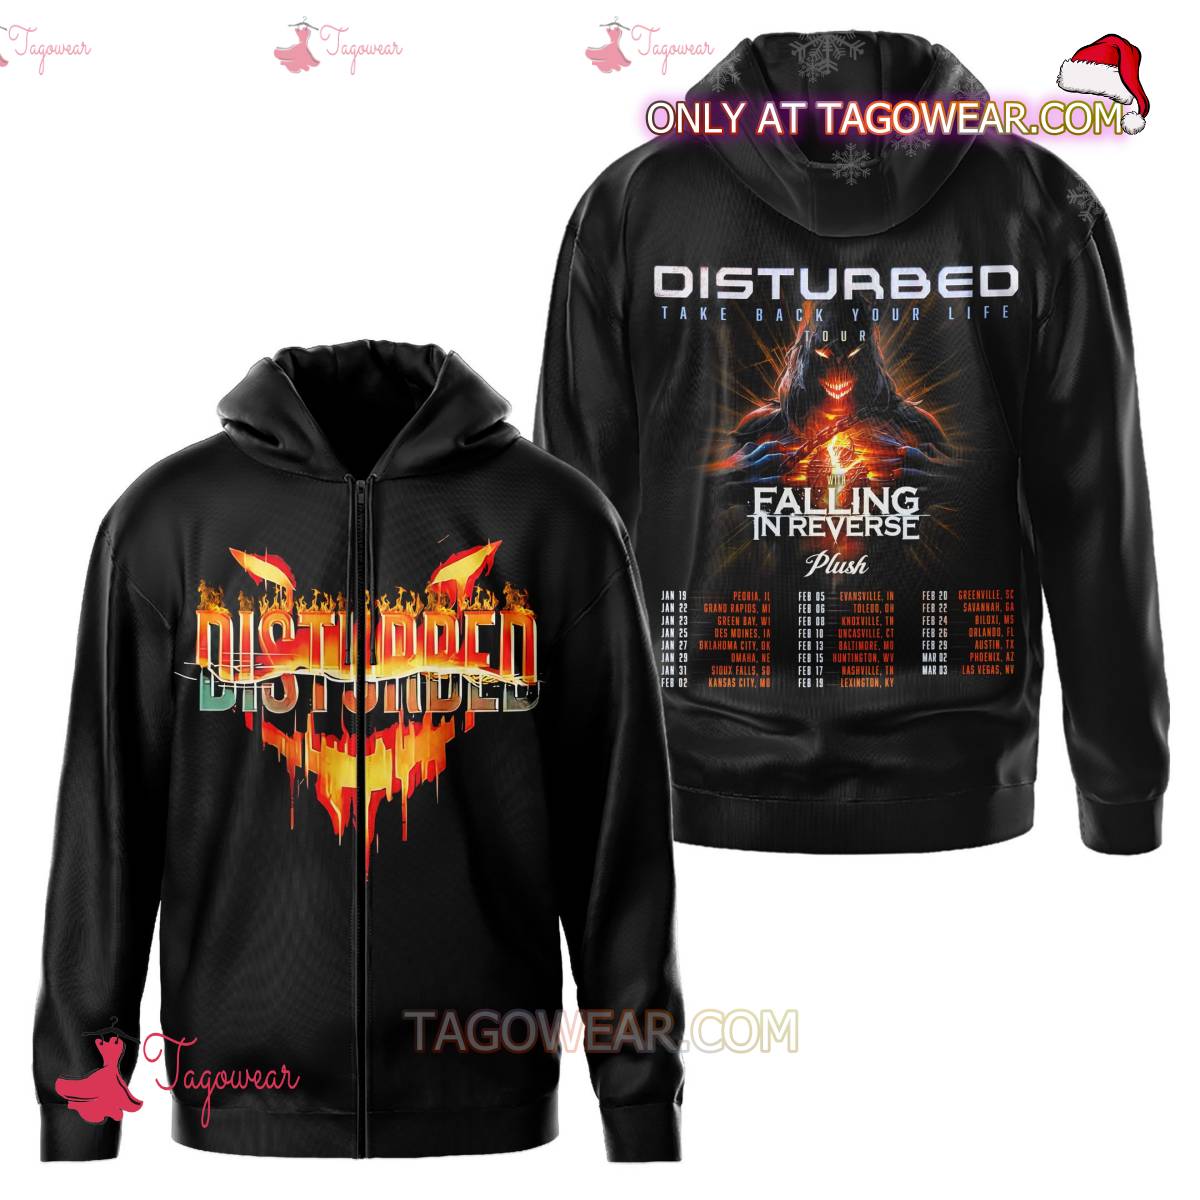 Disturbed Take Back Your Life Tour With Falling In Reverse T-shirt, Hoodie y